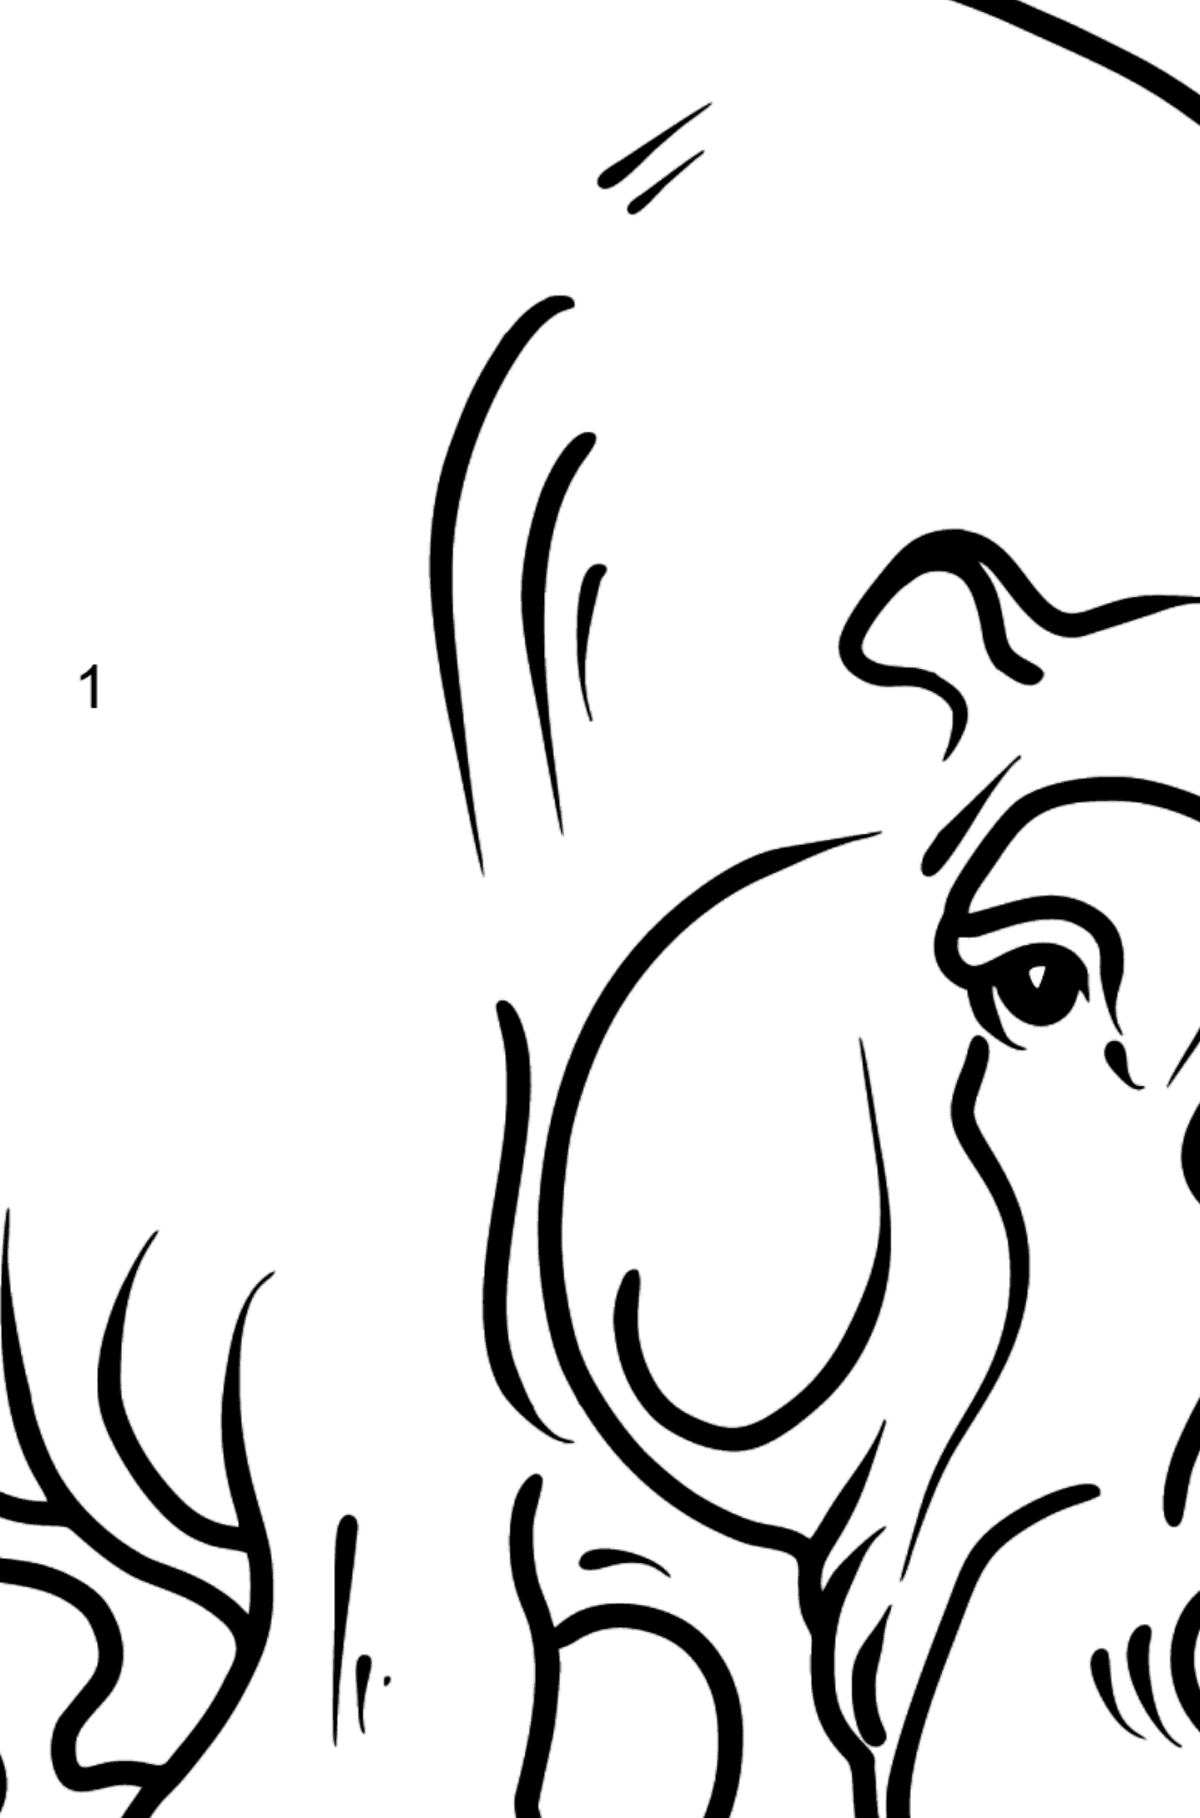 Hippo coloring page - Coloring by Numbers for Kids